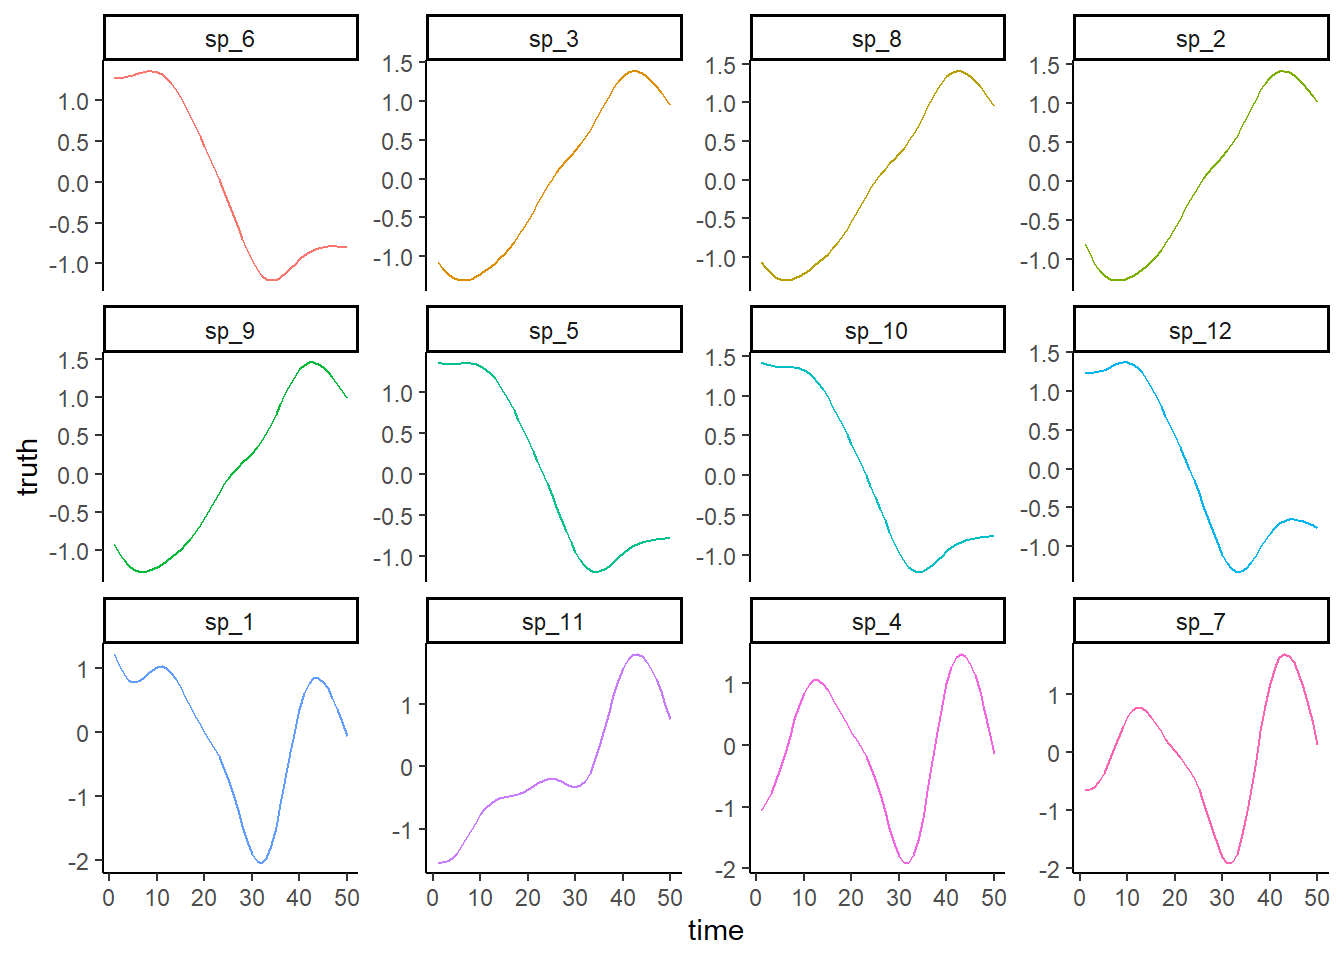 Simulating species' nonlinear time trends using phylogenetic relationships.